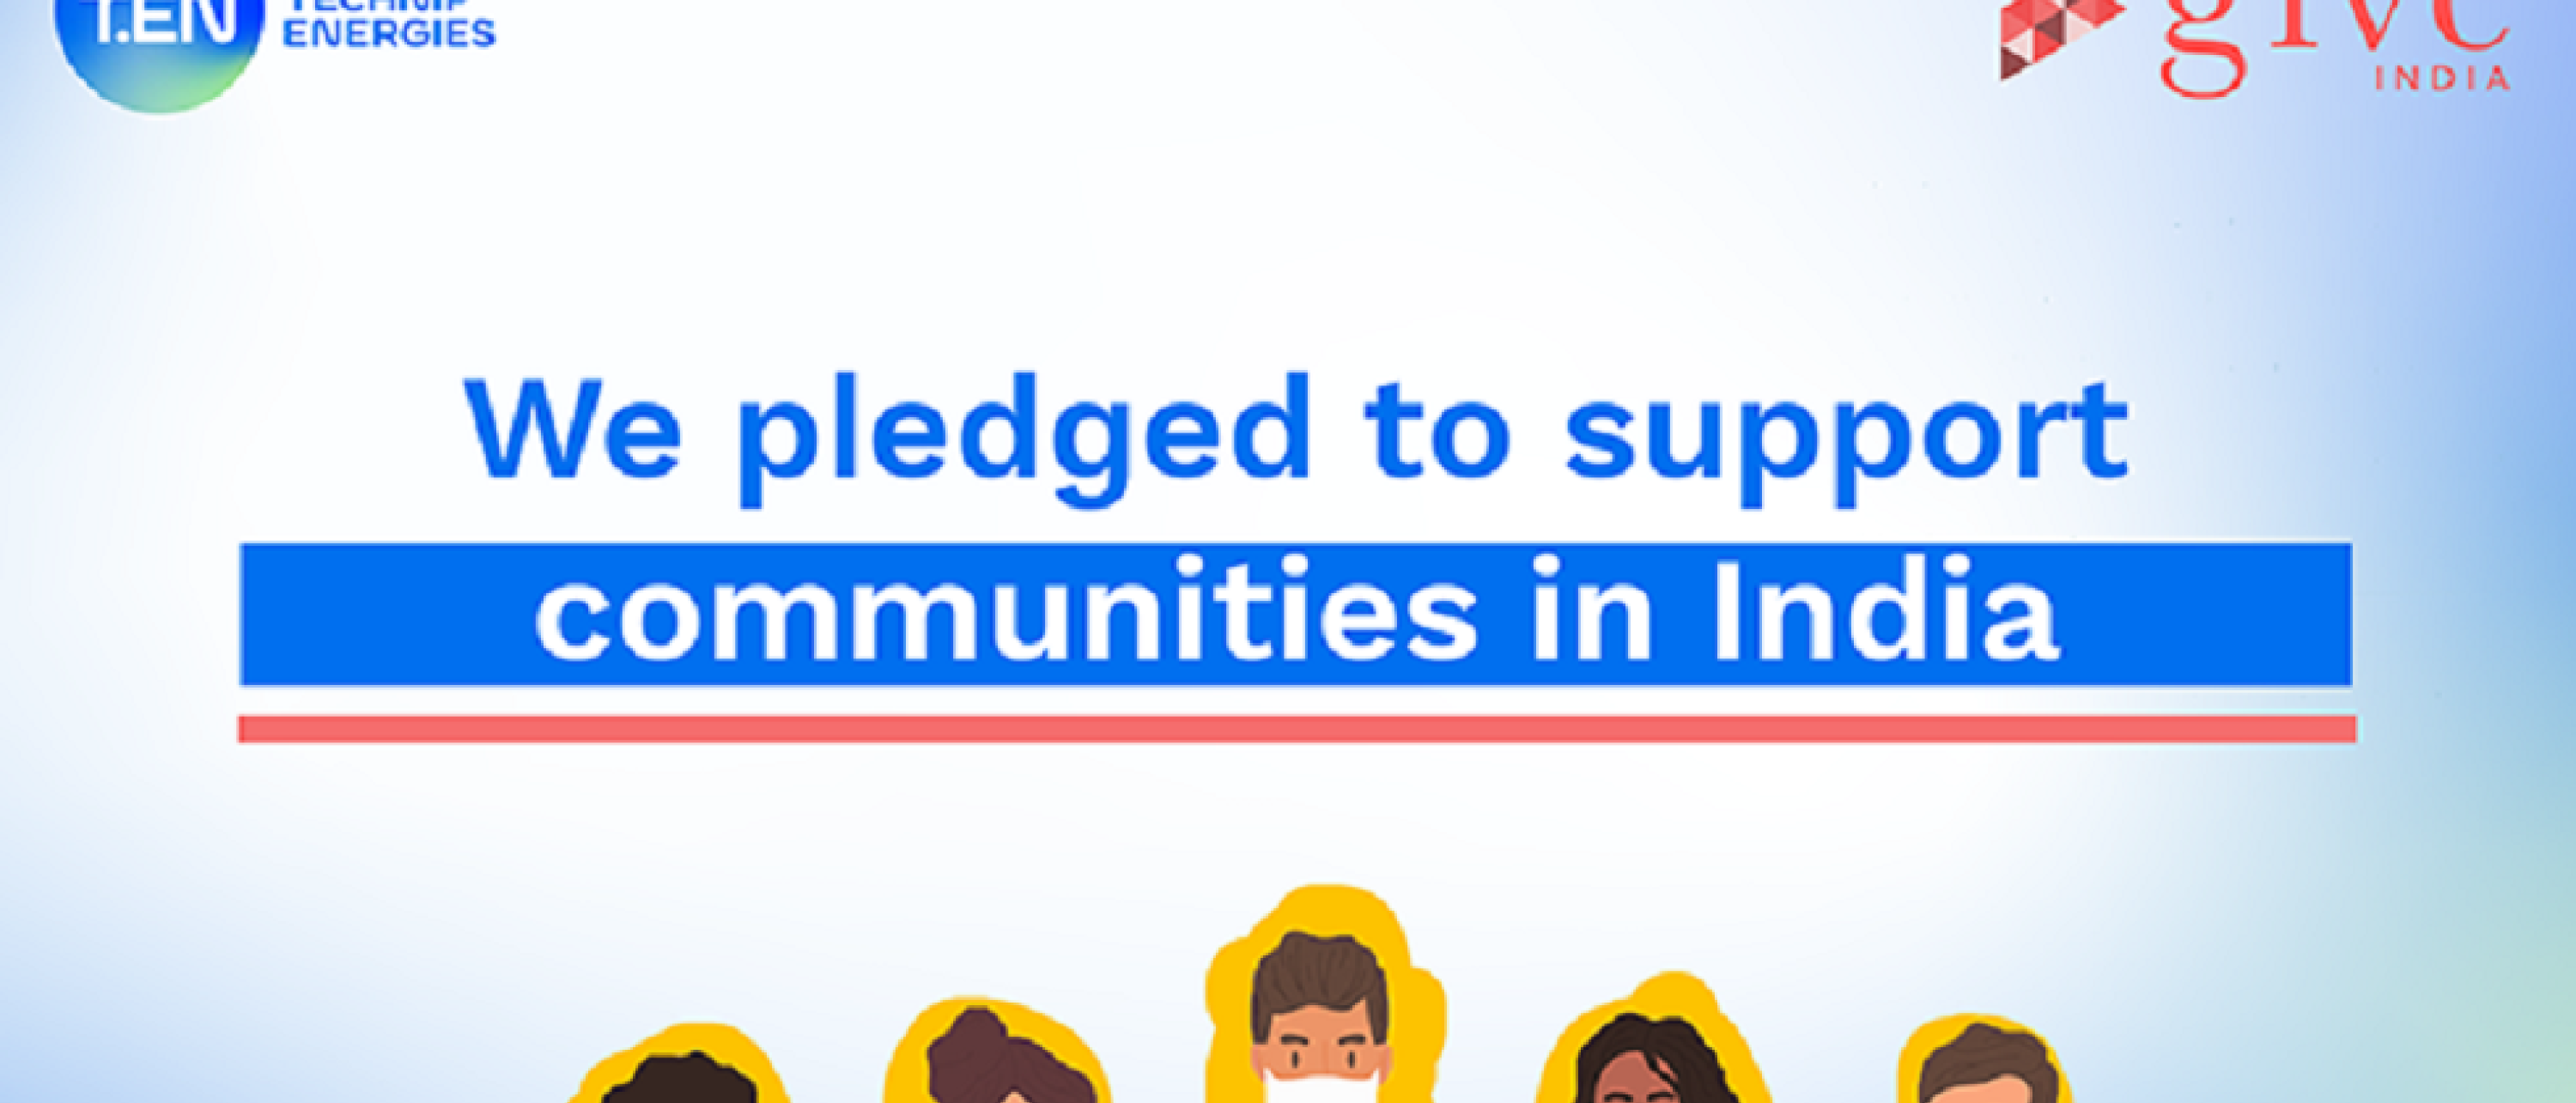 We pledged to support communities in India